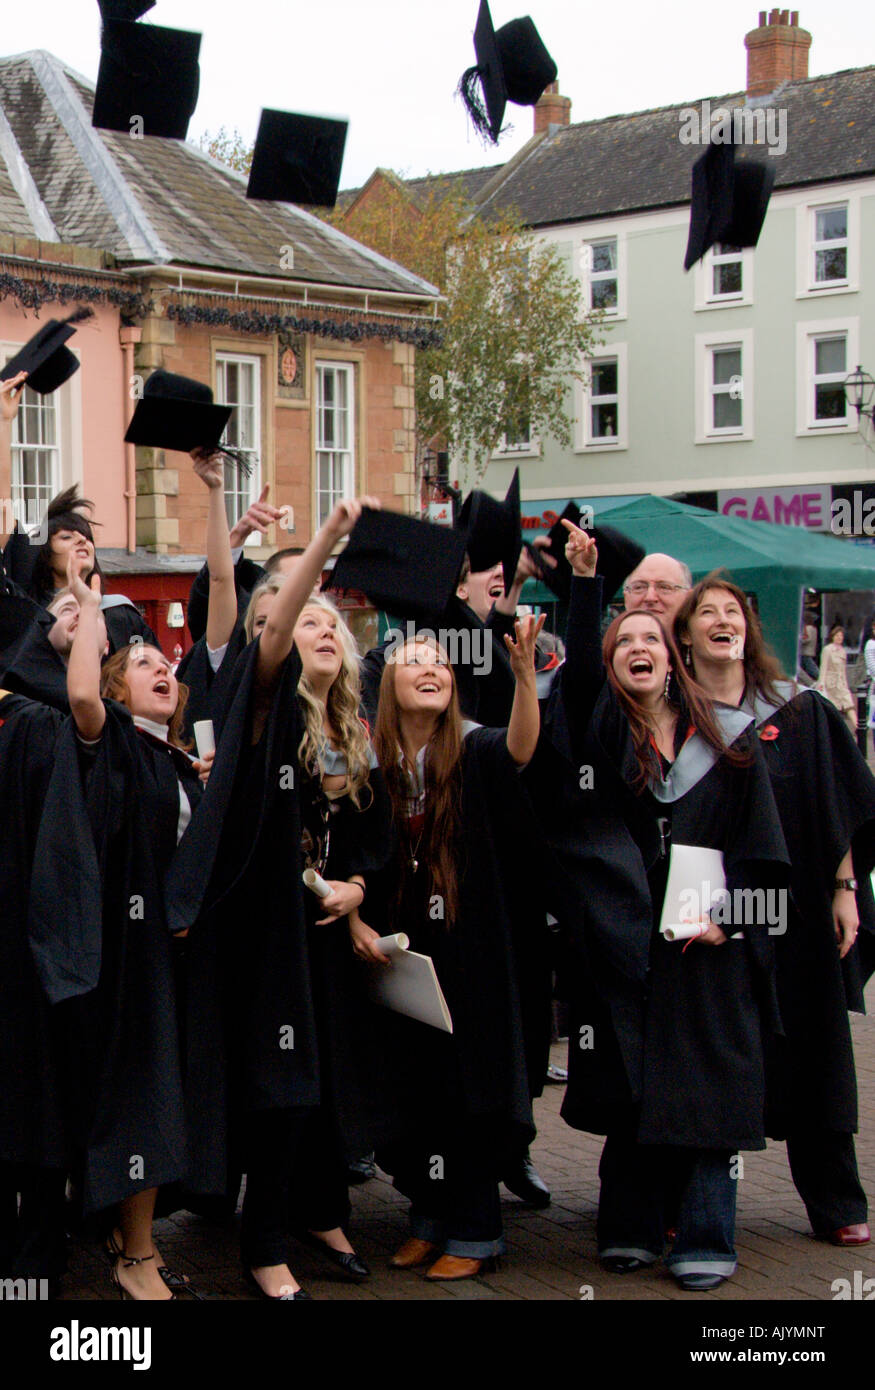 Group of happy student and staff throwing hats into air after graduation ceremony University of Cumbria Carlisle England Stock Photo